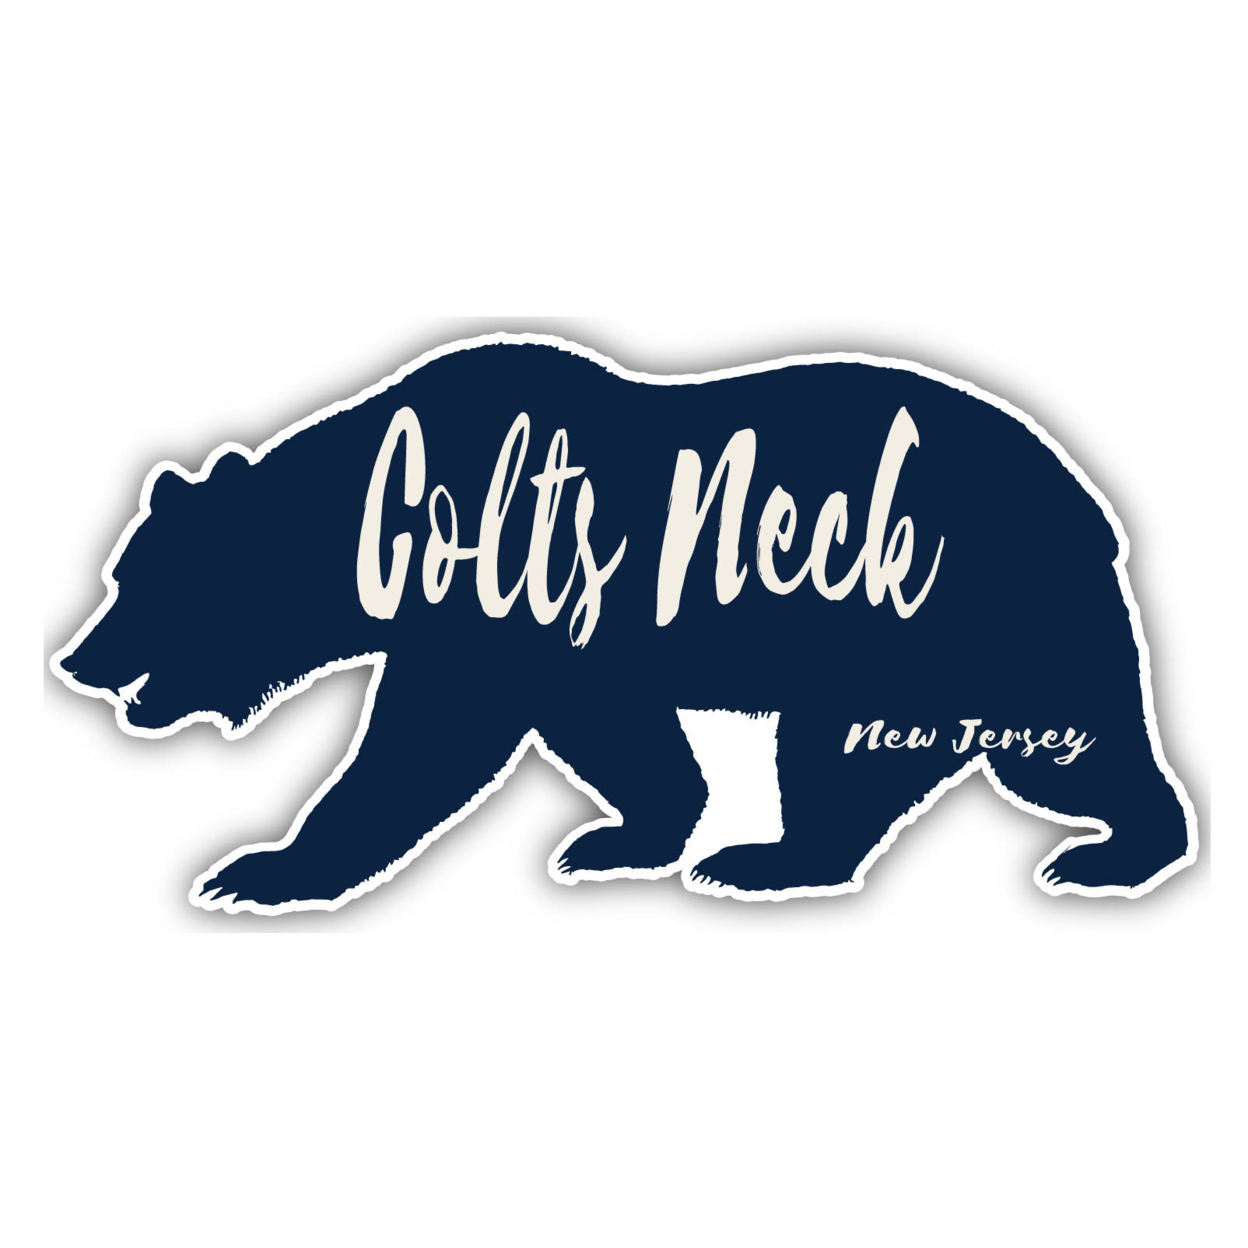 Colts Neck New Jersey Souvenir Decorative Stickers (Choose Theme And Size) - 4-Pack, 4-Inch, Bear